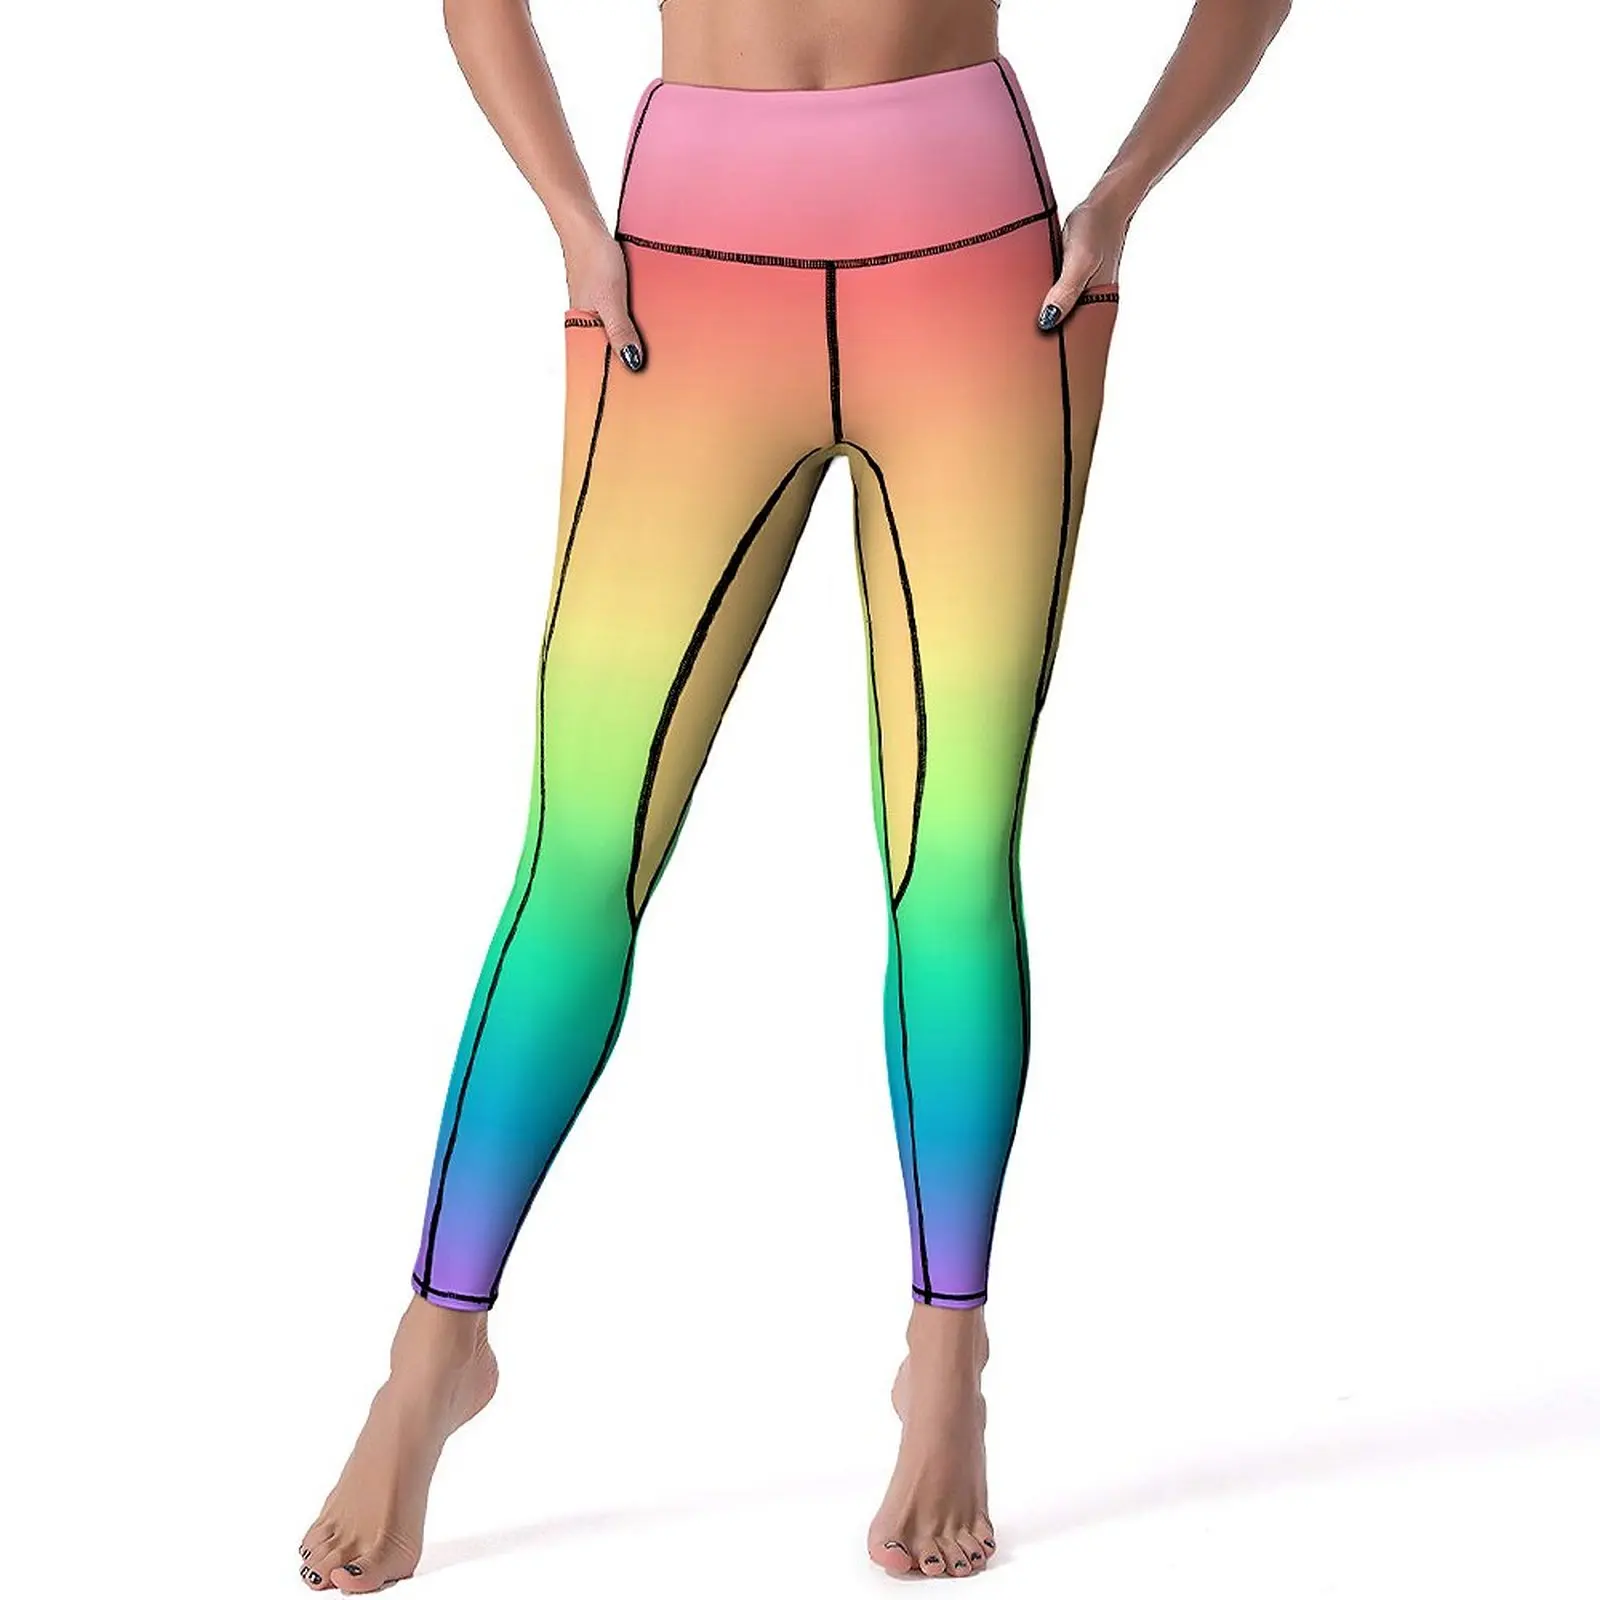 

Ombre Gradient Leggings Sexy Pastel Rainbow Fitness Running Yoga Pants High Waist Stretch Sports Tights Vintage Graphic Leggins